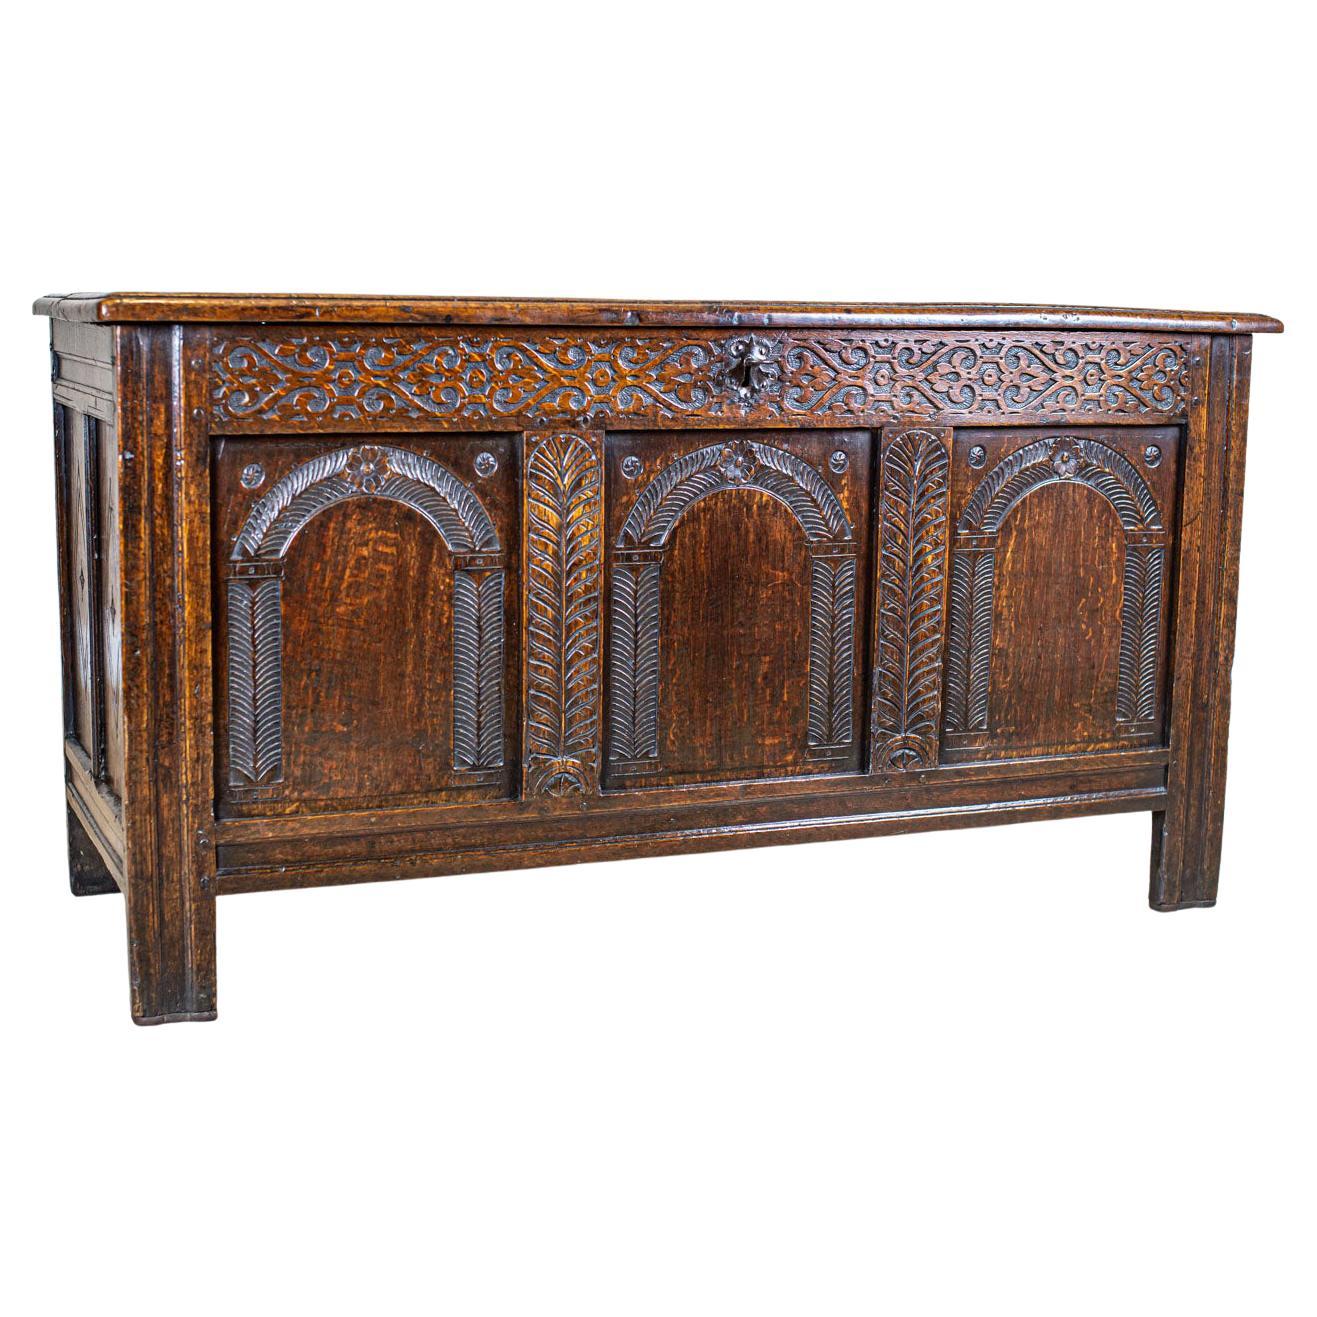 19th-Century Oak Cassone in Carved Floral Patterns For Sale